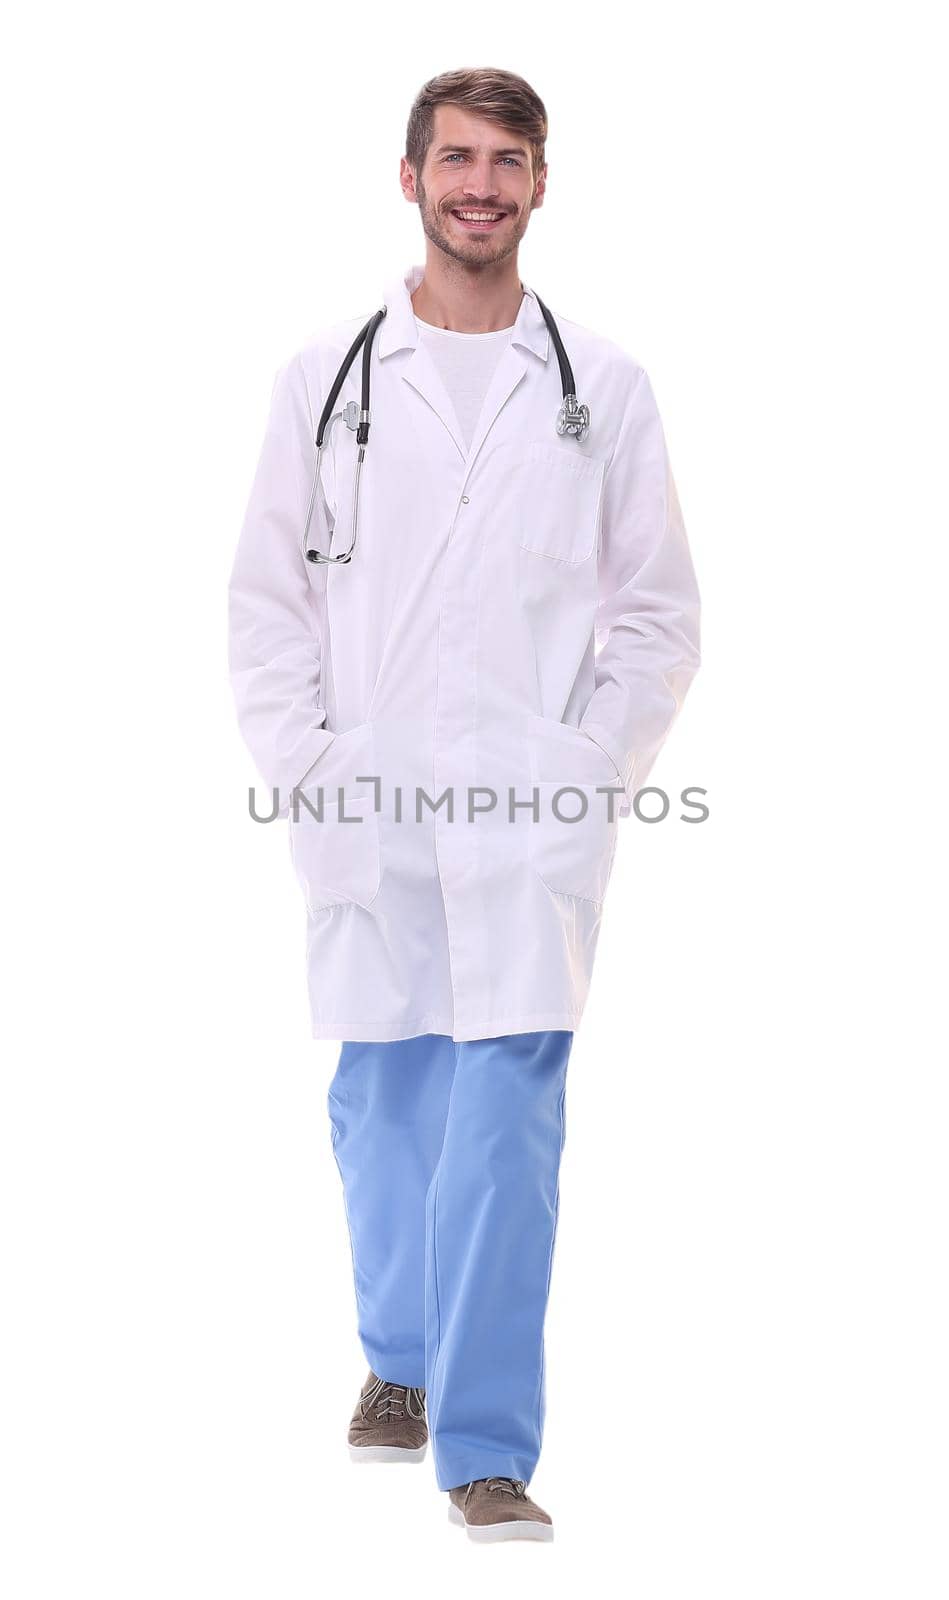 in full growth. smiling doctor physician with stethoscope .isolated on white background